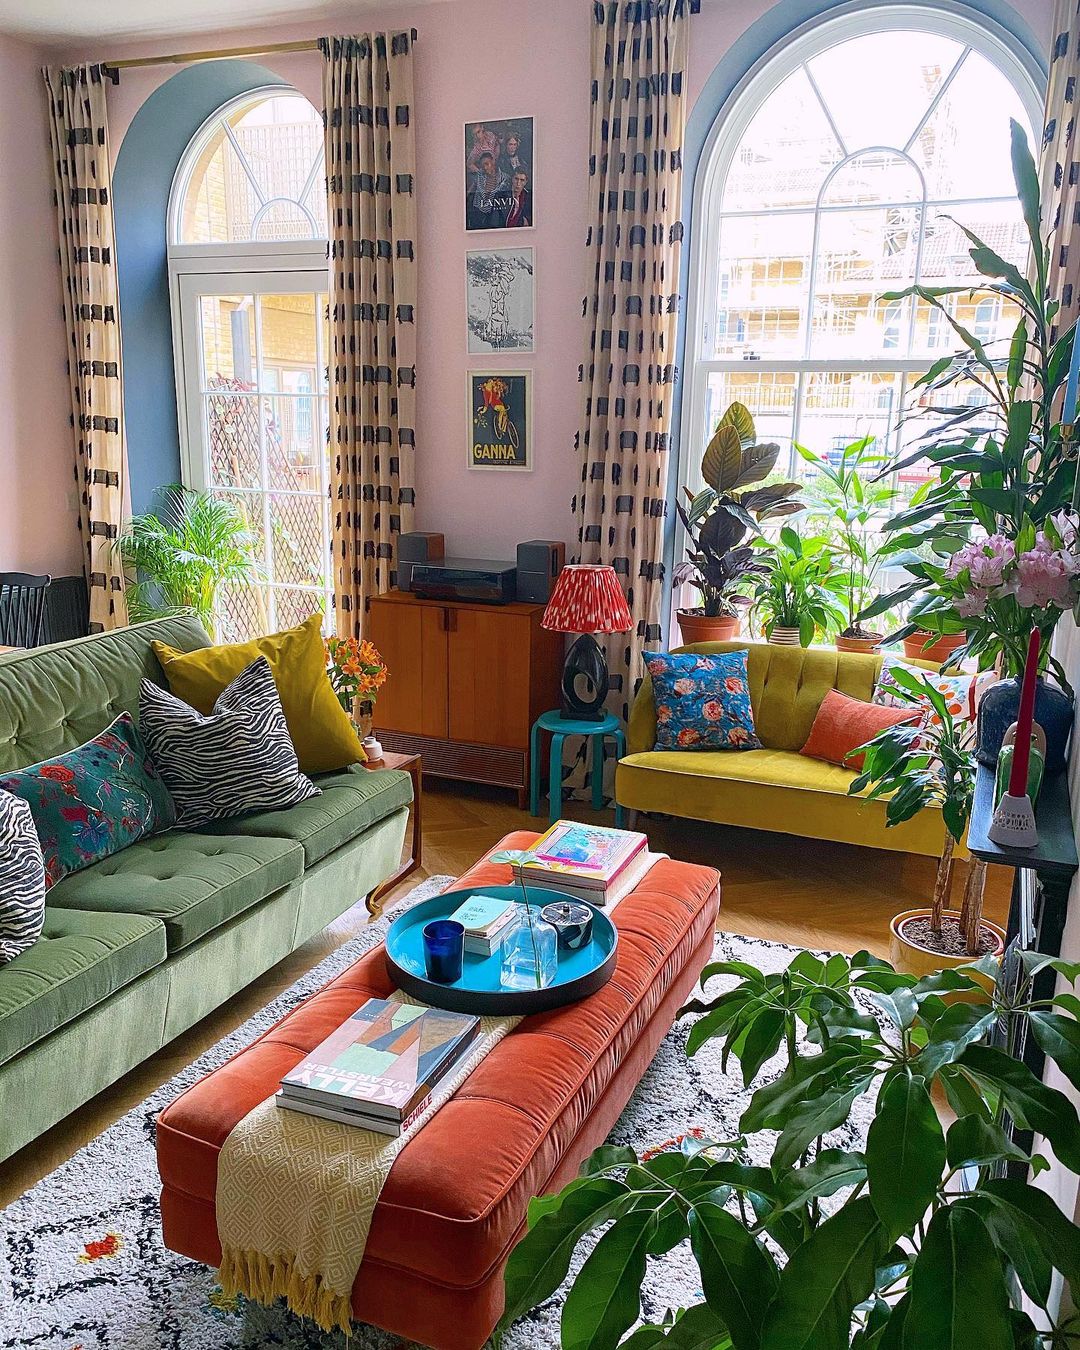 Home Designed with Maximalism Style. Photo by Instagram user @themellowmaximalist